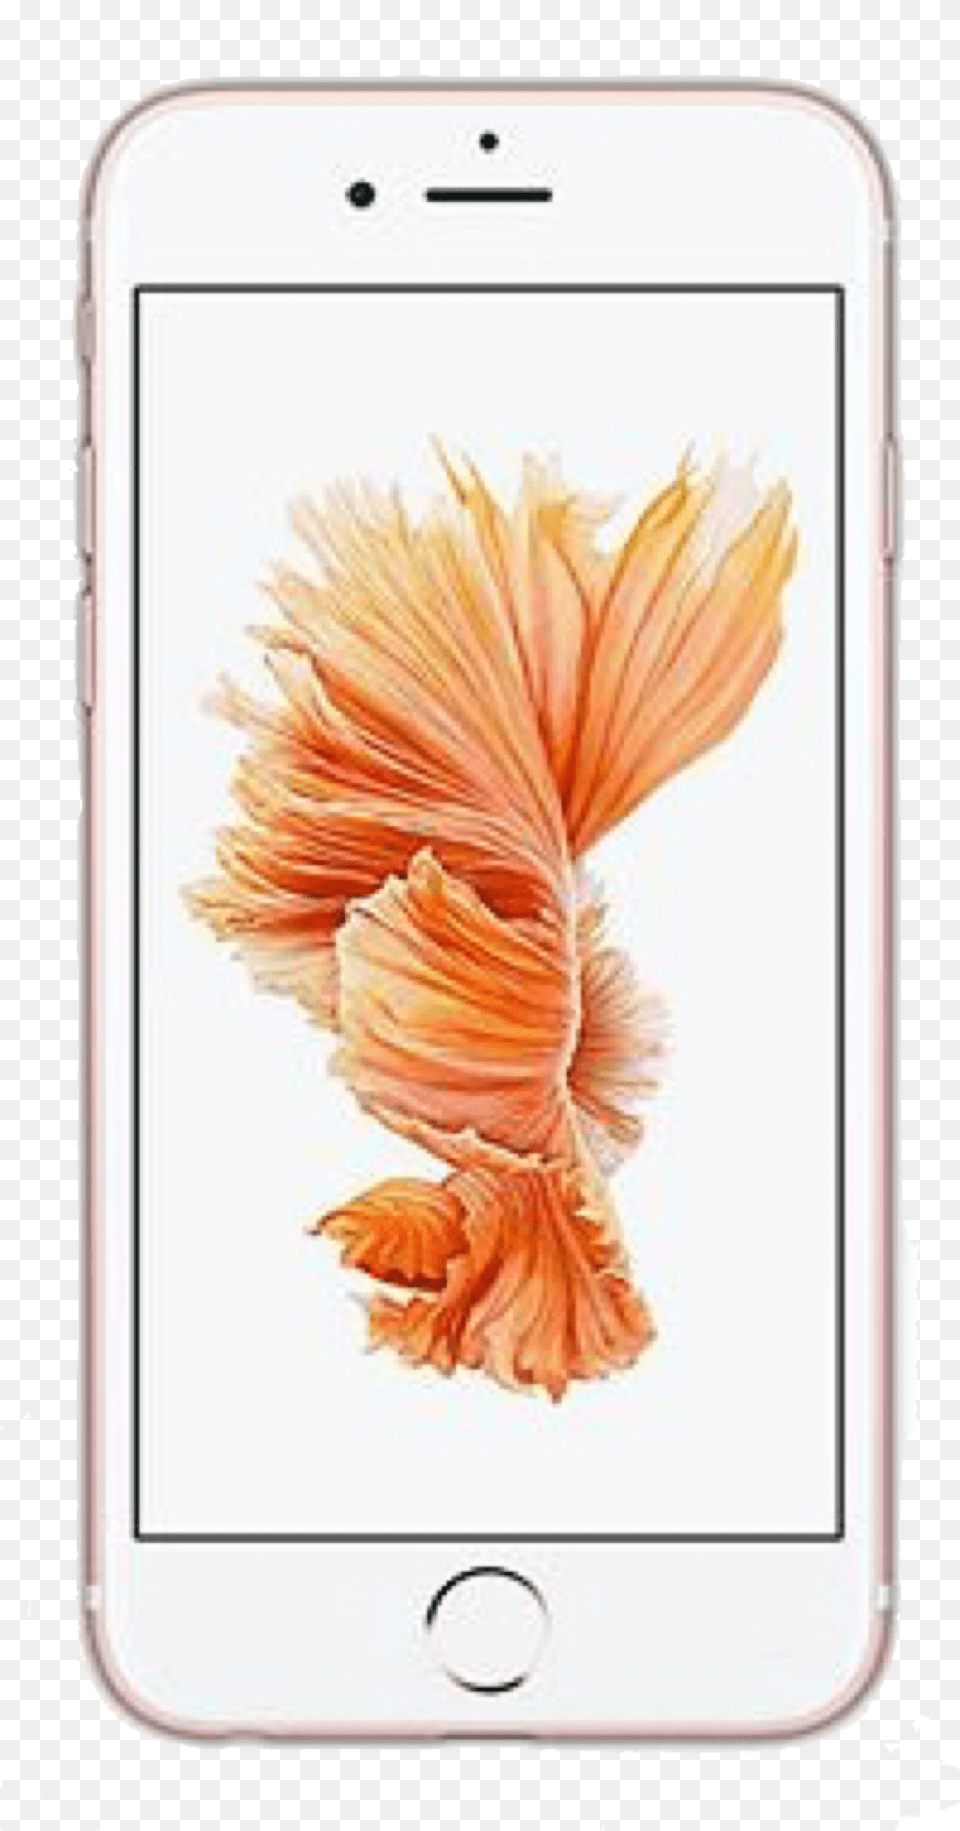 Iphone Iphone6 Iphone7 Apple Phone Trendy Basic Rose Gold Iphone 6 Plus, Electronics, Mobile Phone, Flower, Petal Free Transparent Png